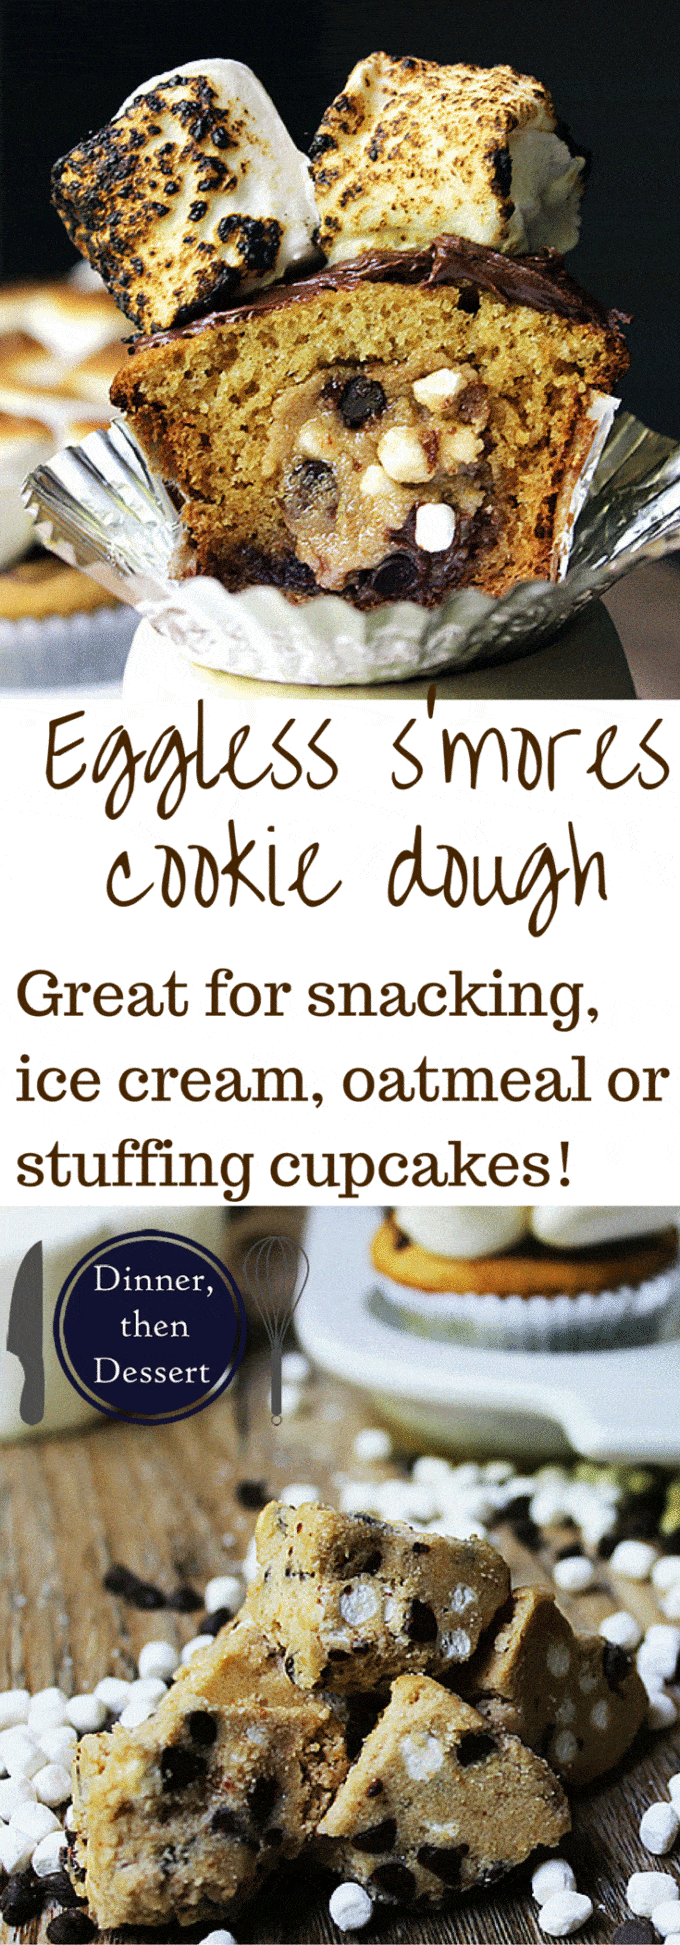 Safe to eat, Eggless S'mores Cookie Dough is a great snack or topping in things like ice cream, baked into cupcakes, or oatmeal. Made with graham cracker crumbs, chocolate chips and mini cereal marshmallows!